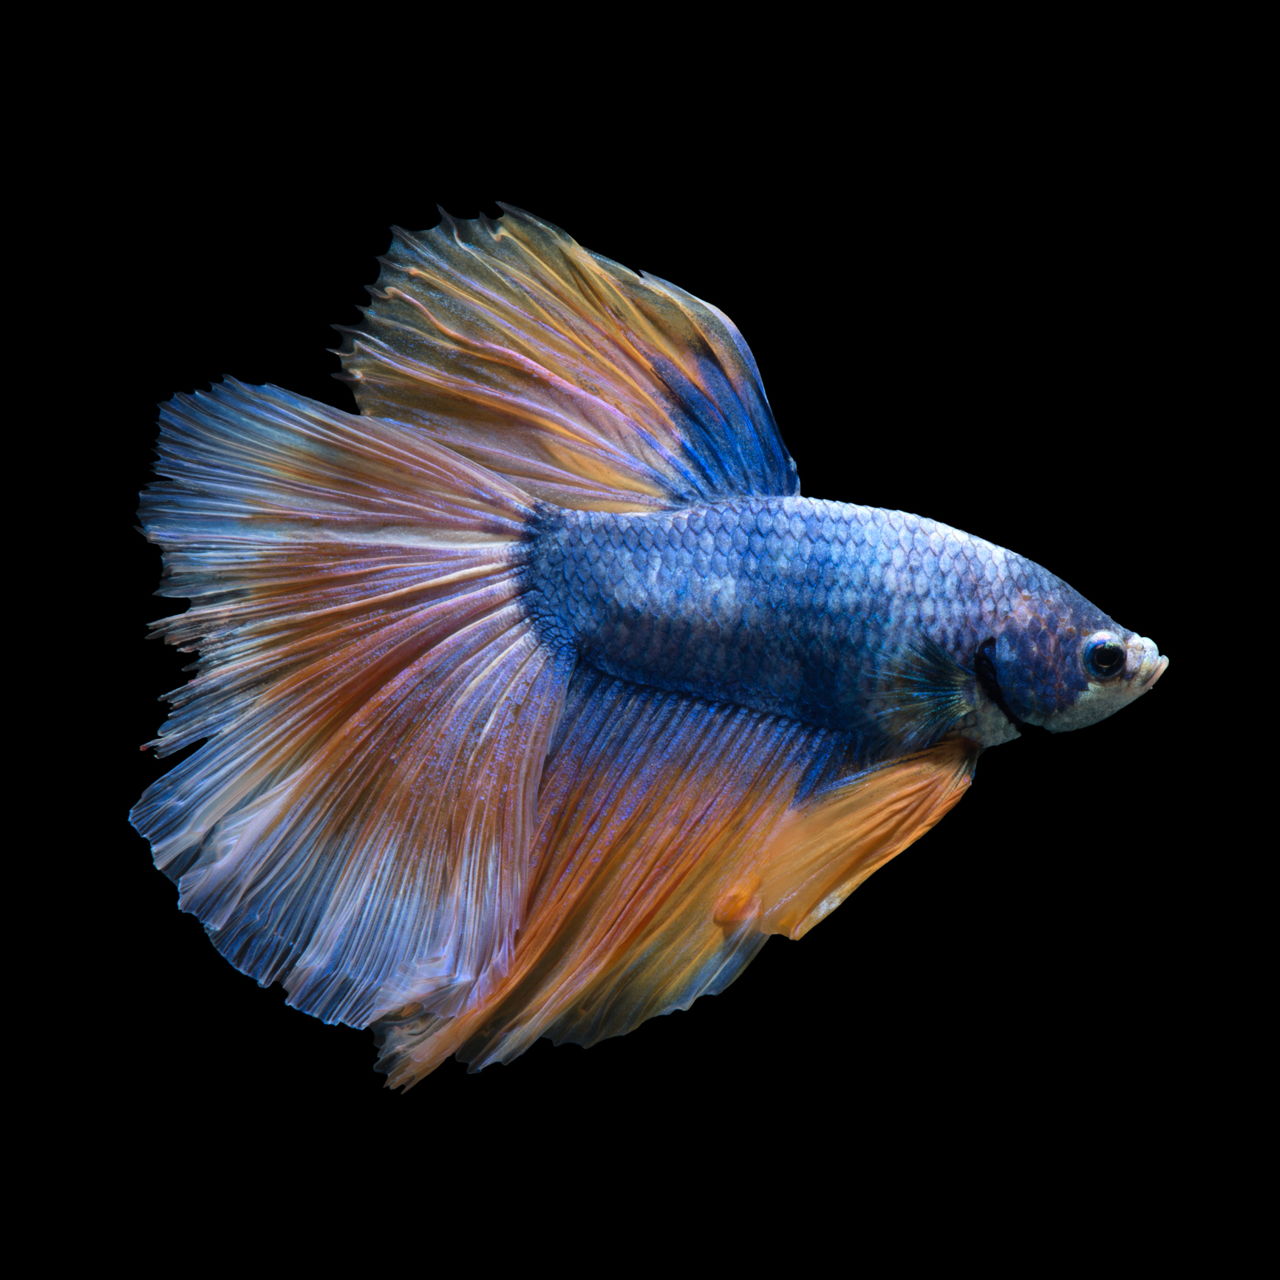 Remarkably Astonishing Facts About Betta Fish - Pet Ponder